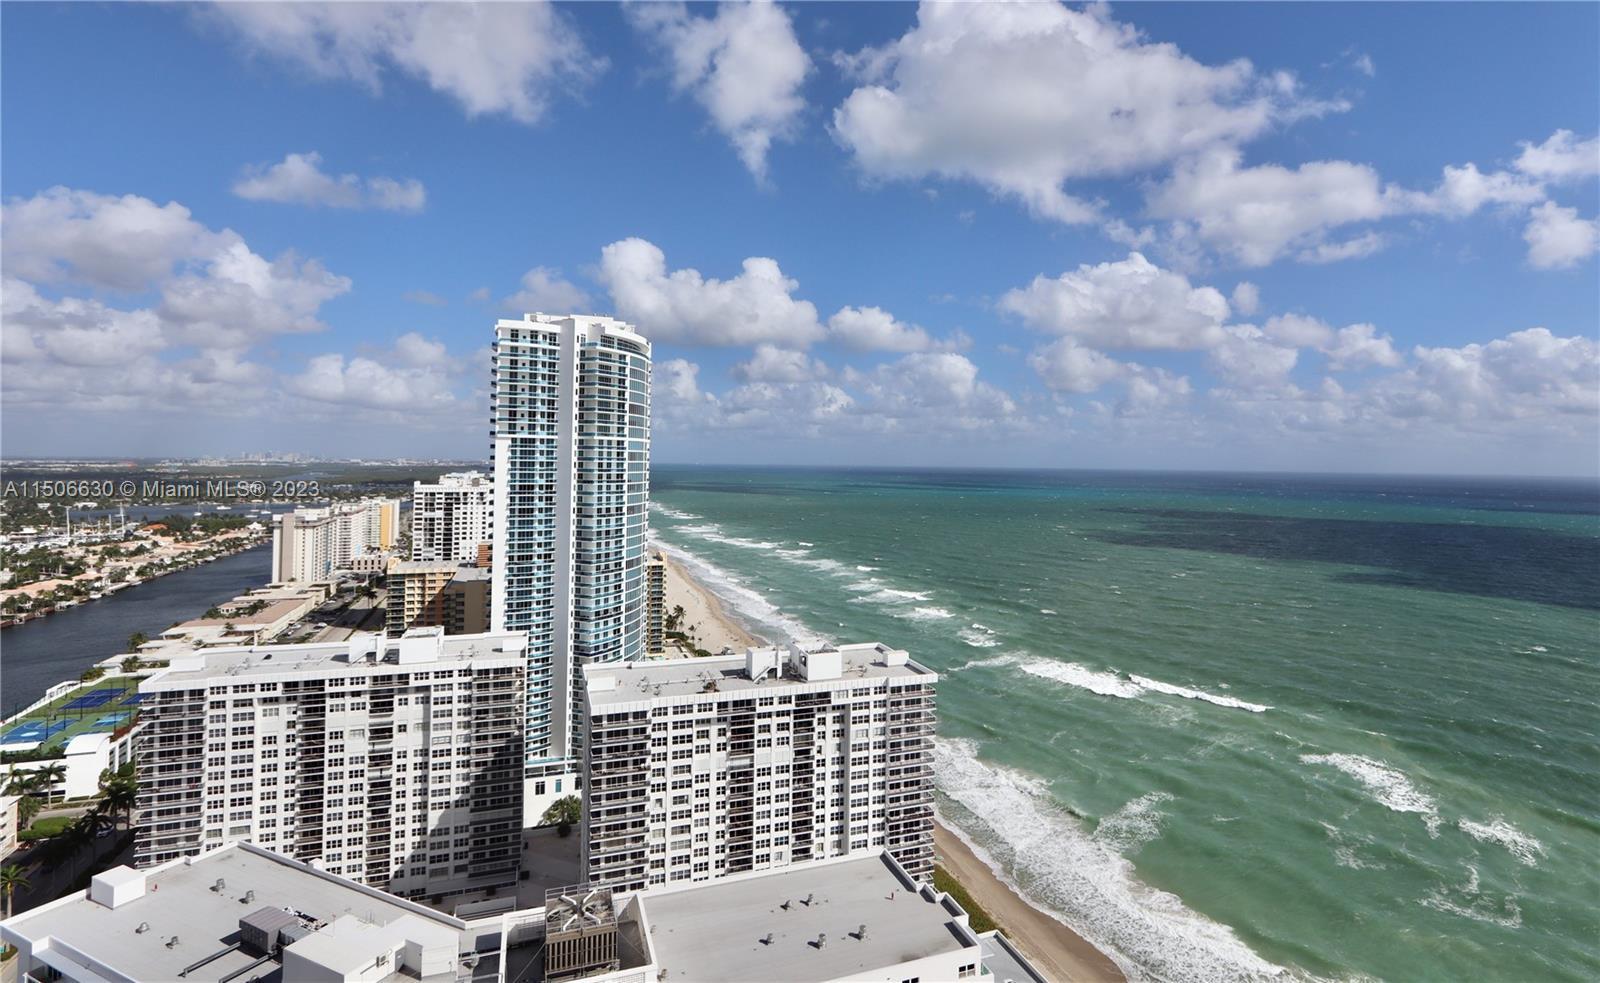 Photo of 3101 S Ocean Dr #3205 in Hollywood, FL